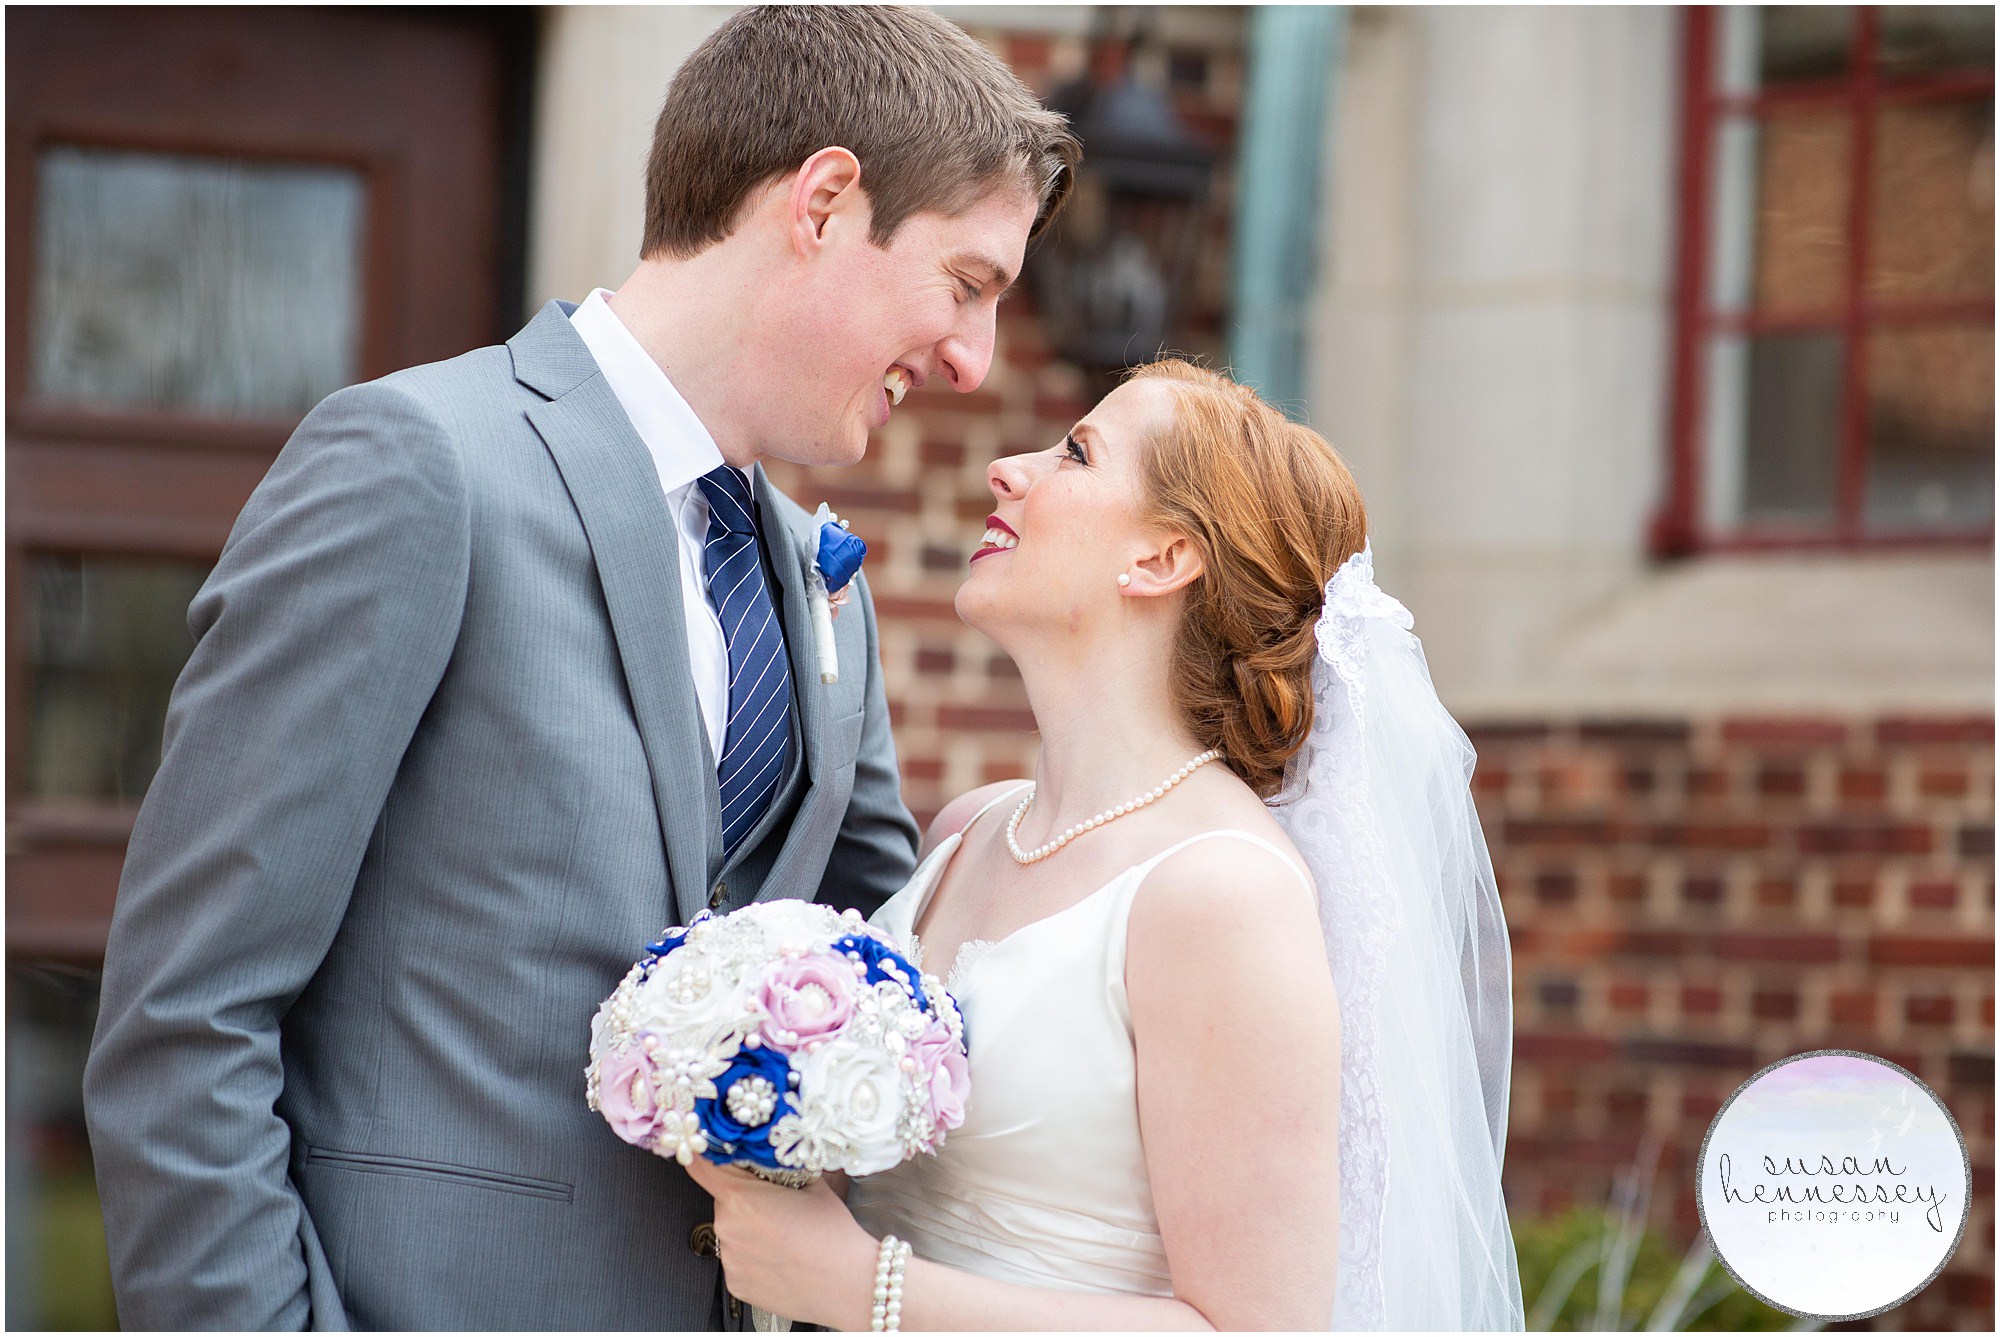 Romantic outdoor portraits of bride and groom at Moorestown Community House